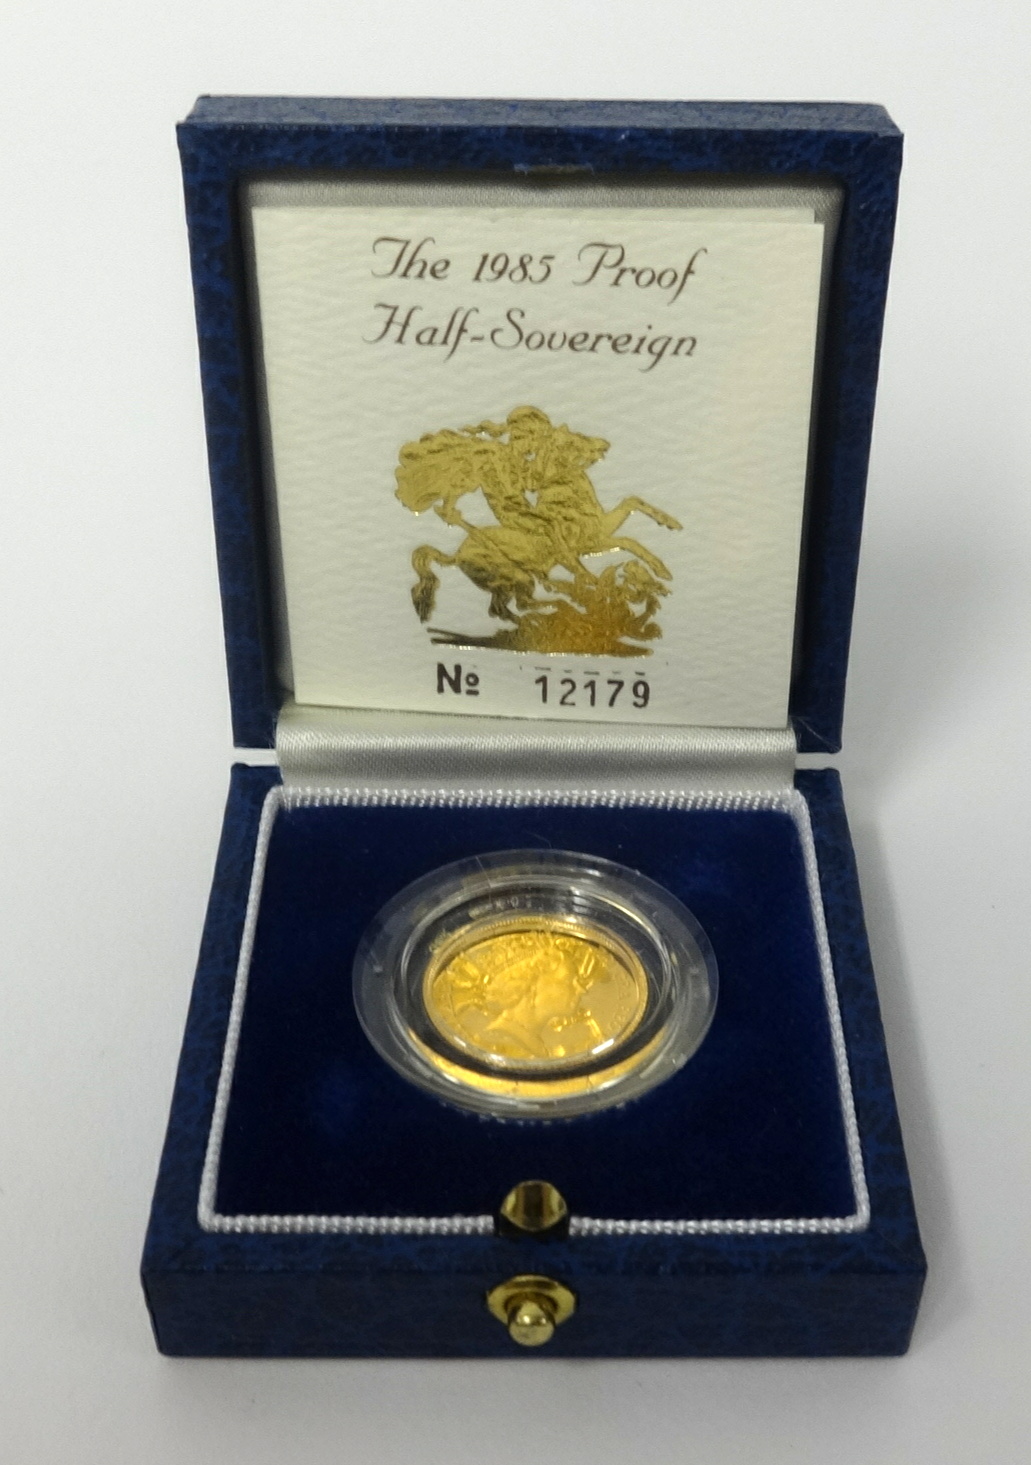 Royal Mint, 1985 gold proof half sovereign in fitted case and certificate.